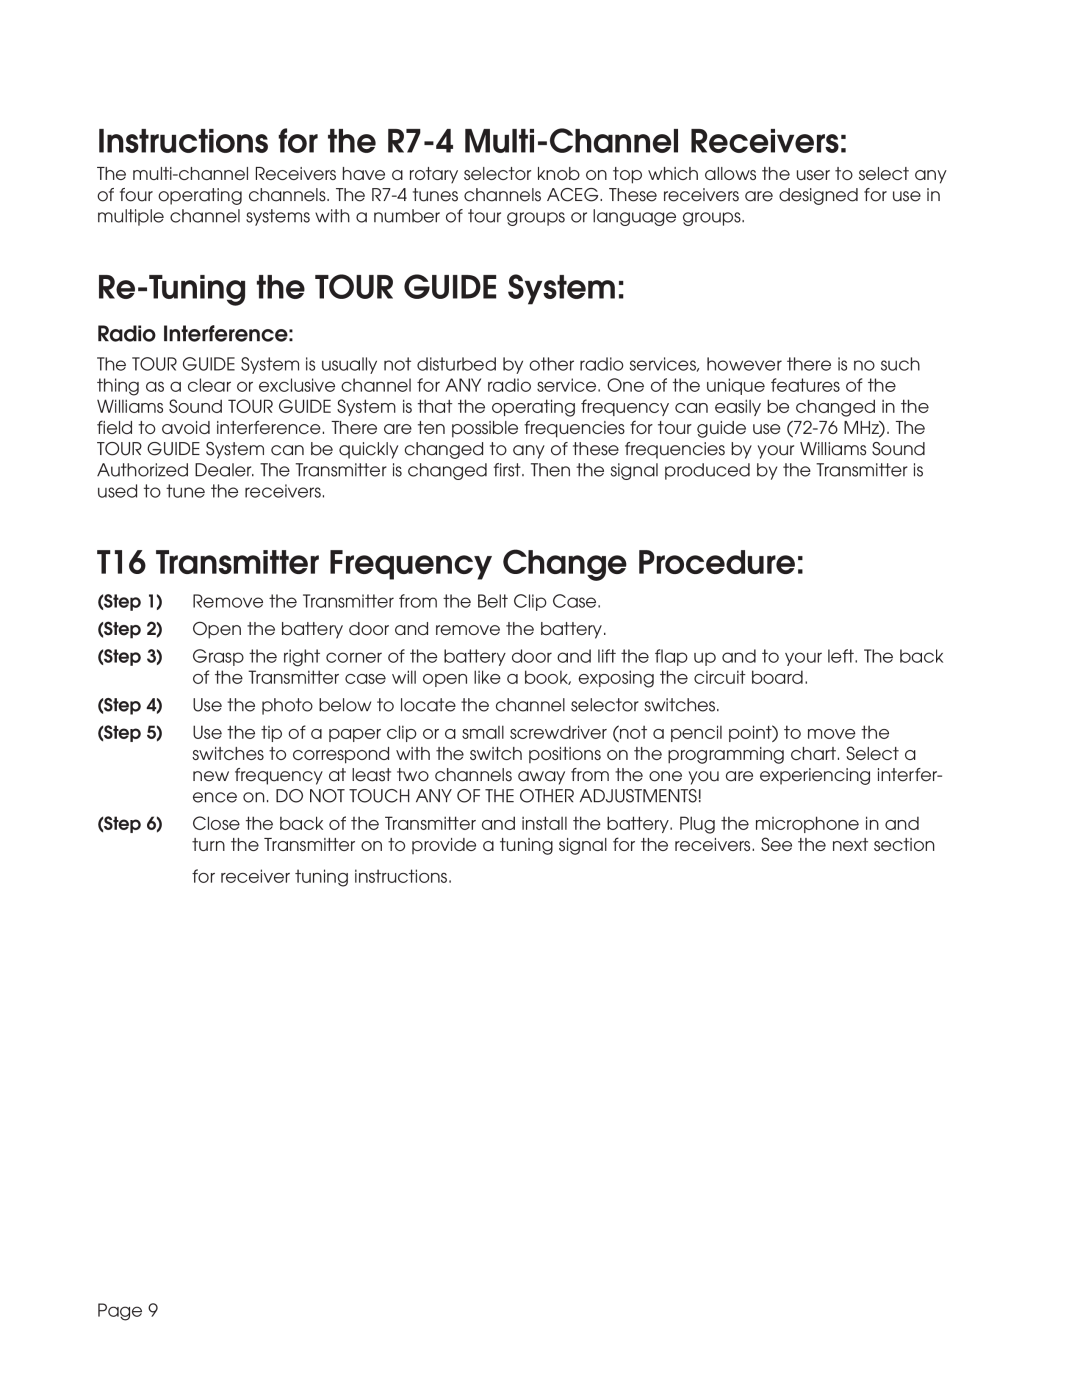 Williams Sound TGS SYS A manual Instructions for the R7-4 Multi-ChannelReceivers, Re-Tuningthe TOUR GUIDE System 